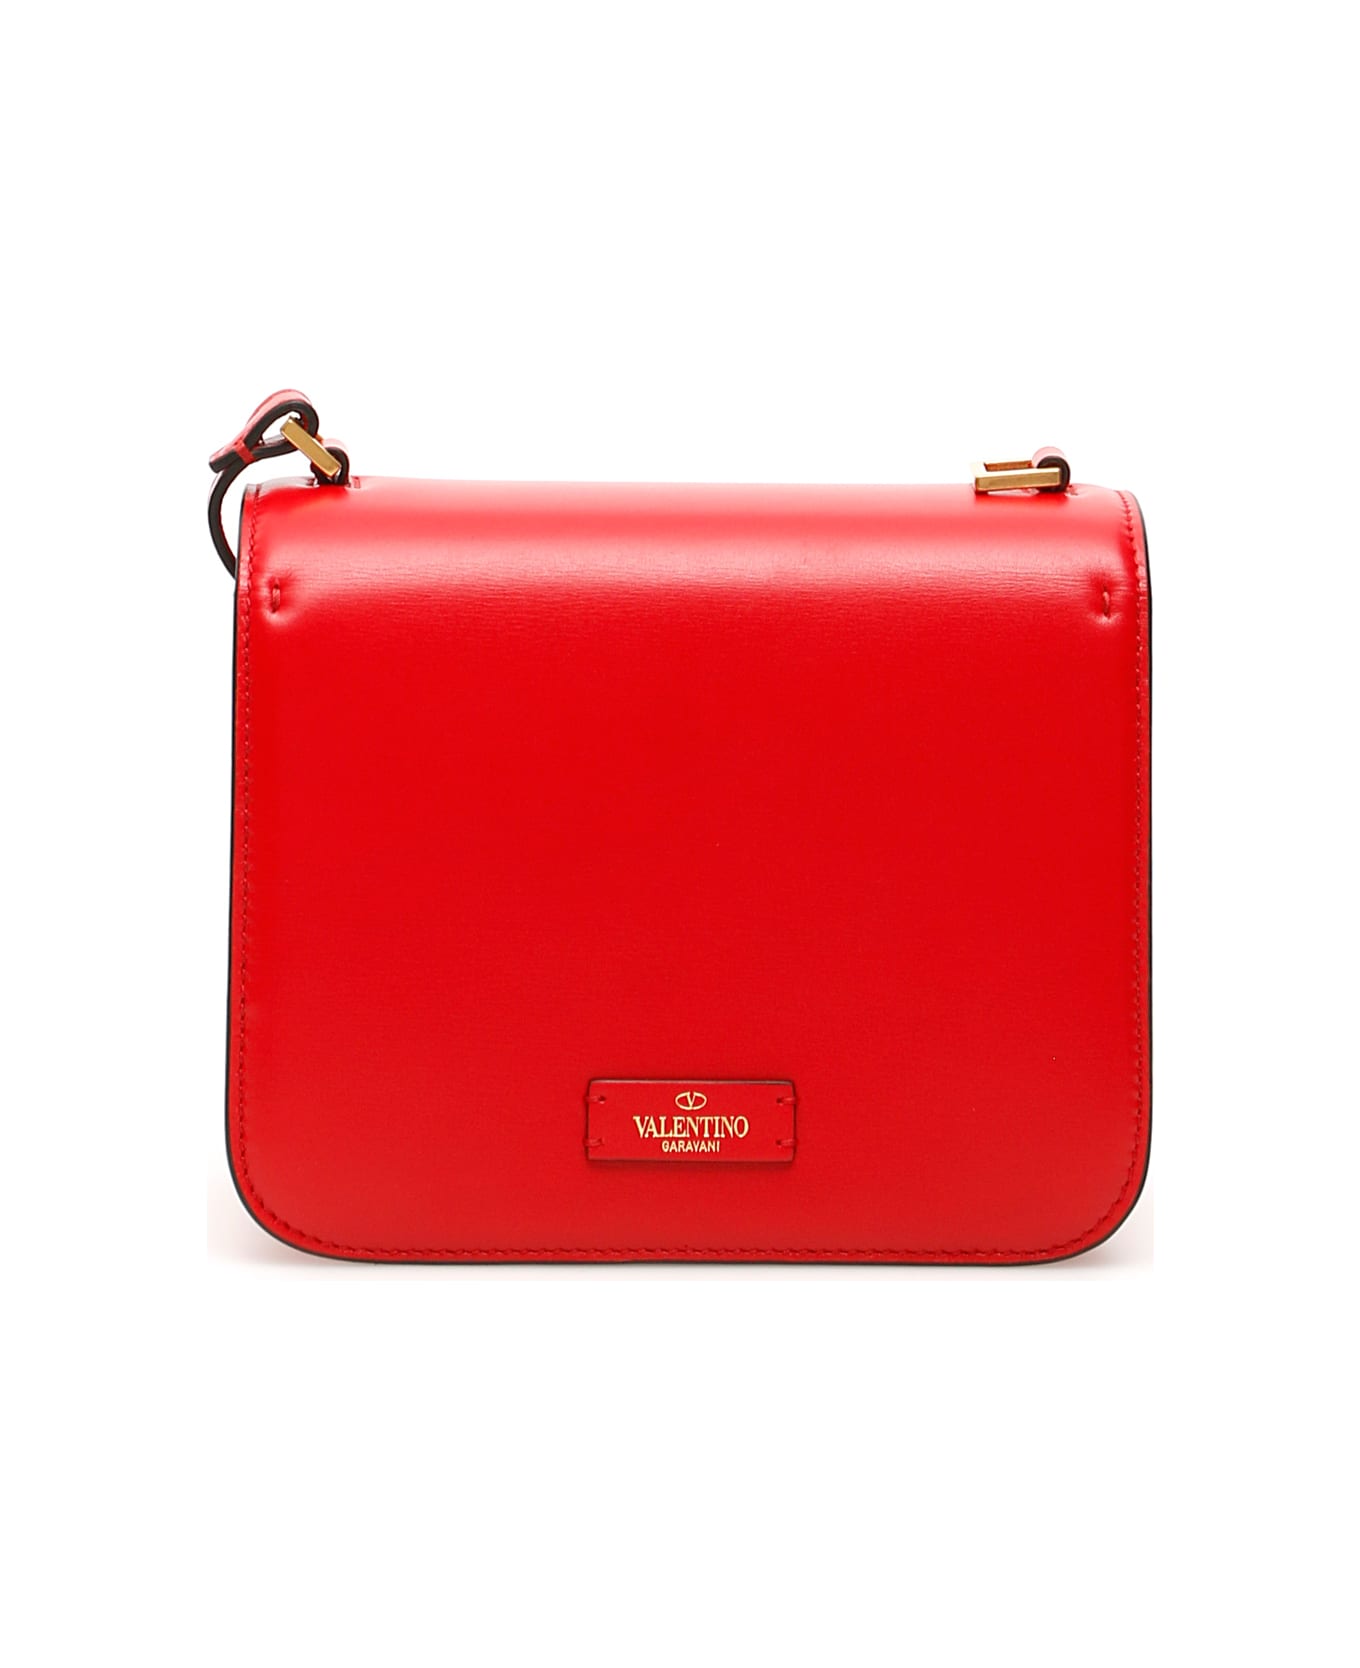 Valentino Small Vsling Bag | italist, ALWAYS LIKE A SALE